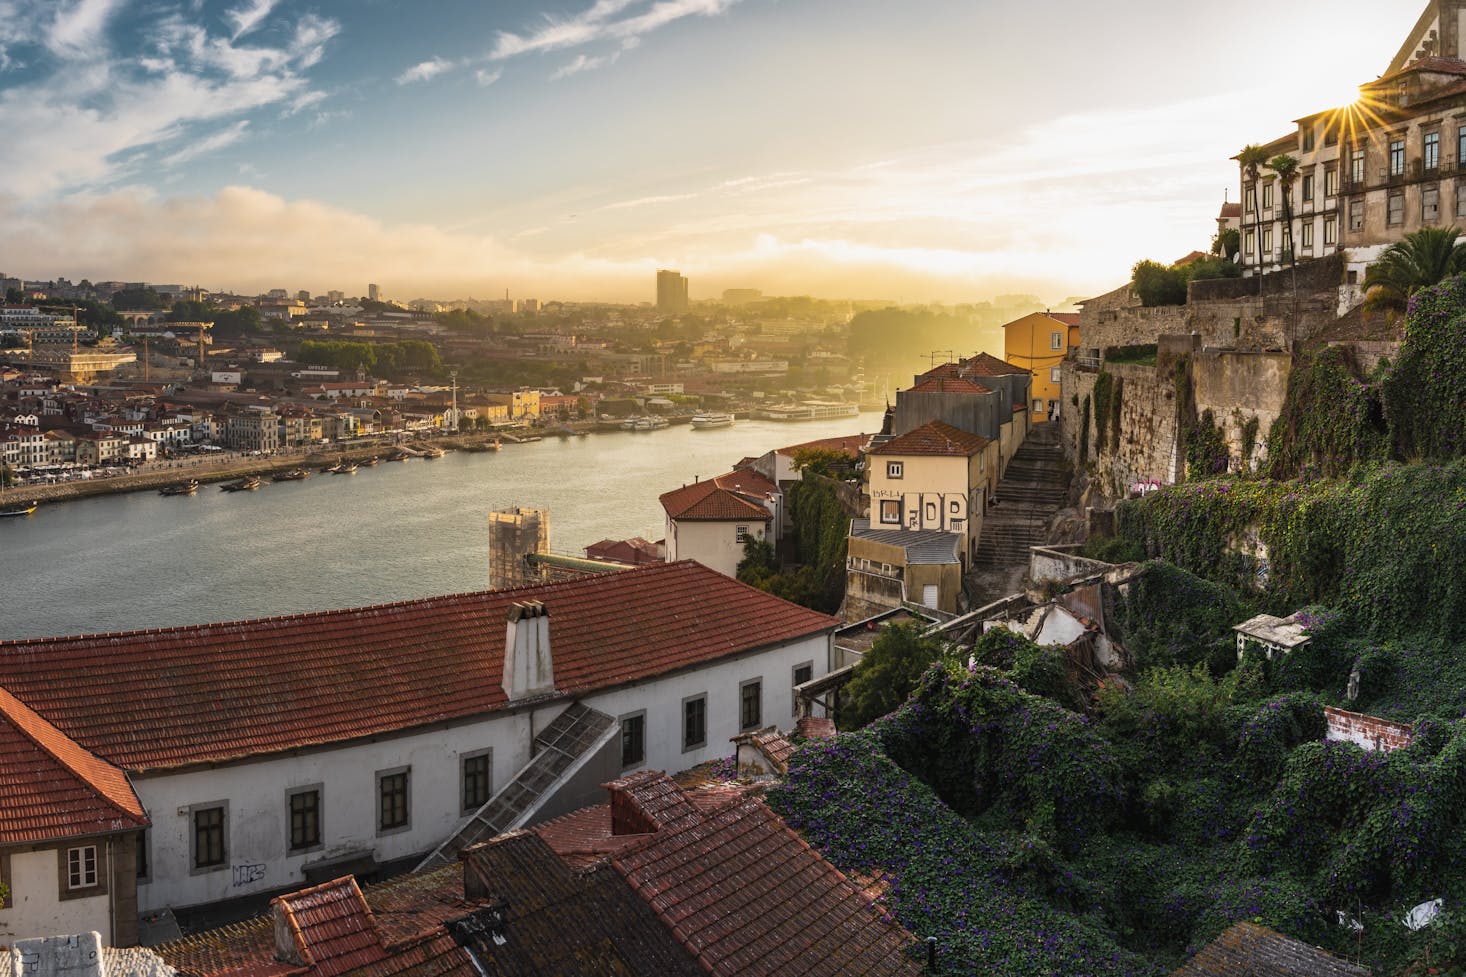 view of Porto overlooking a red roof